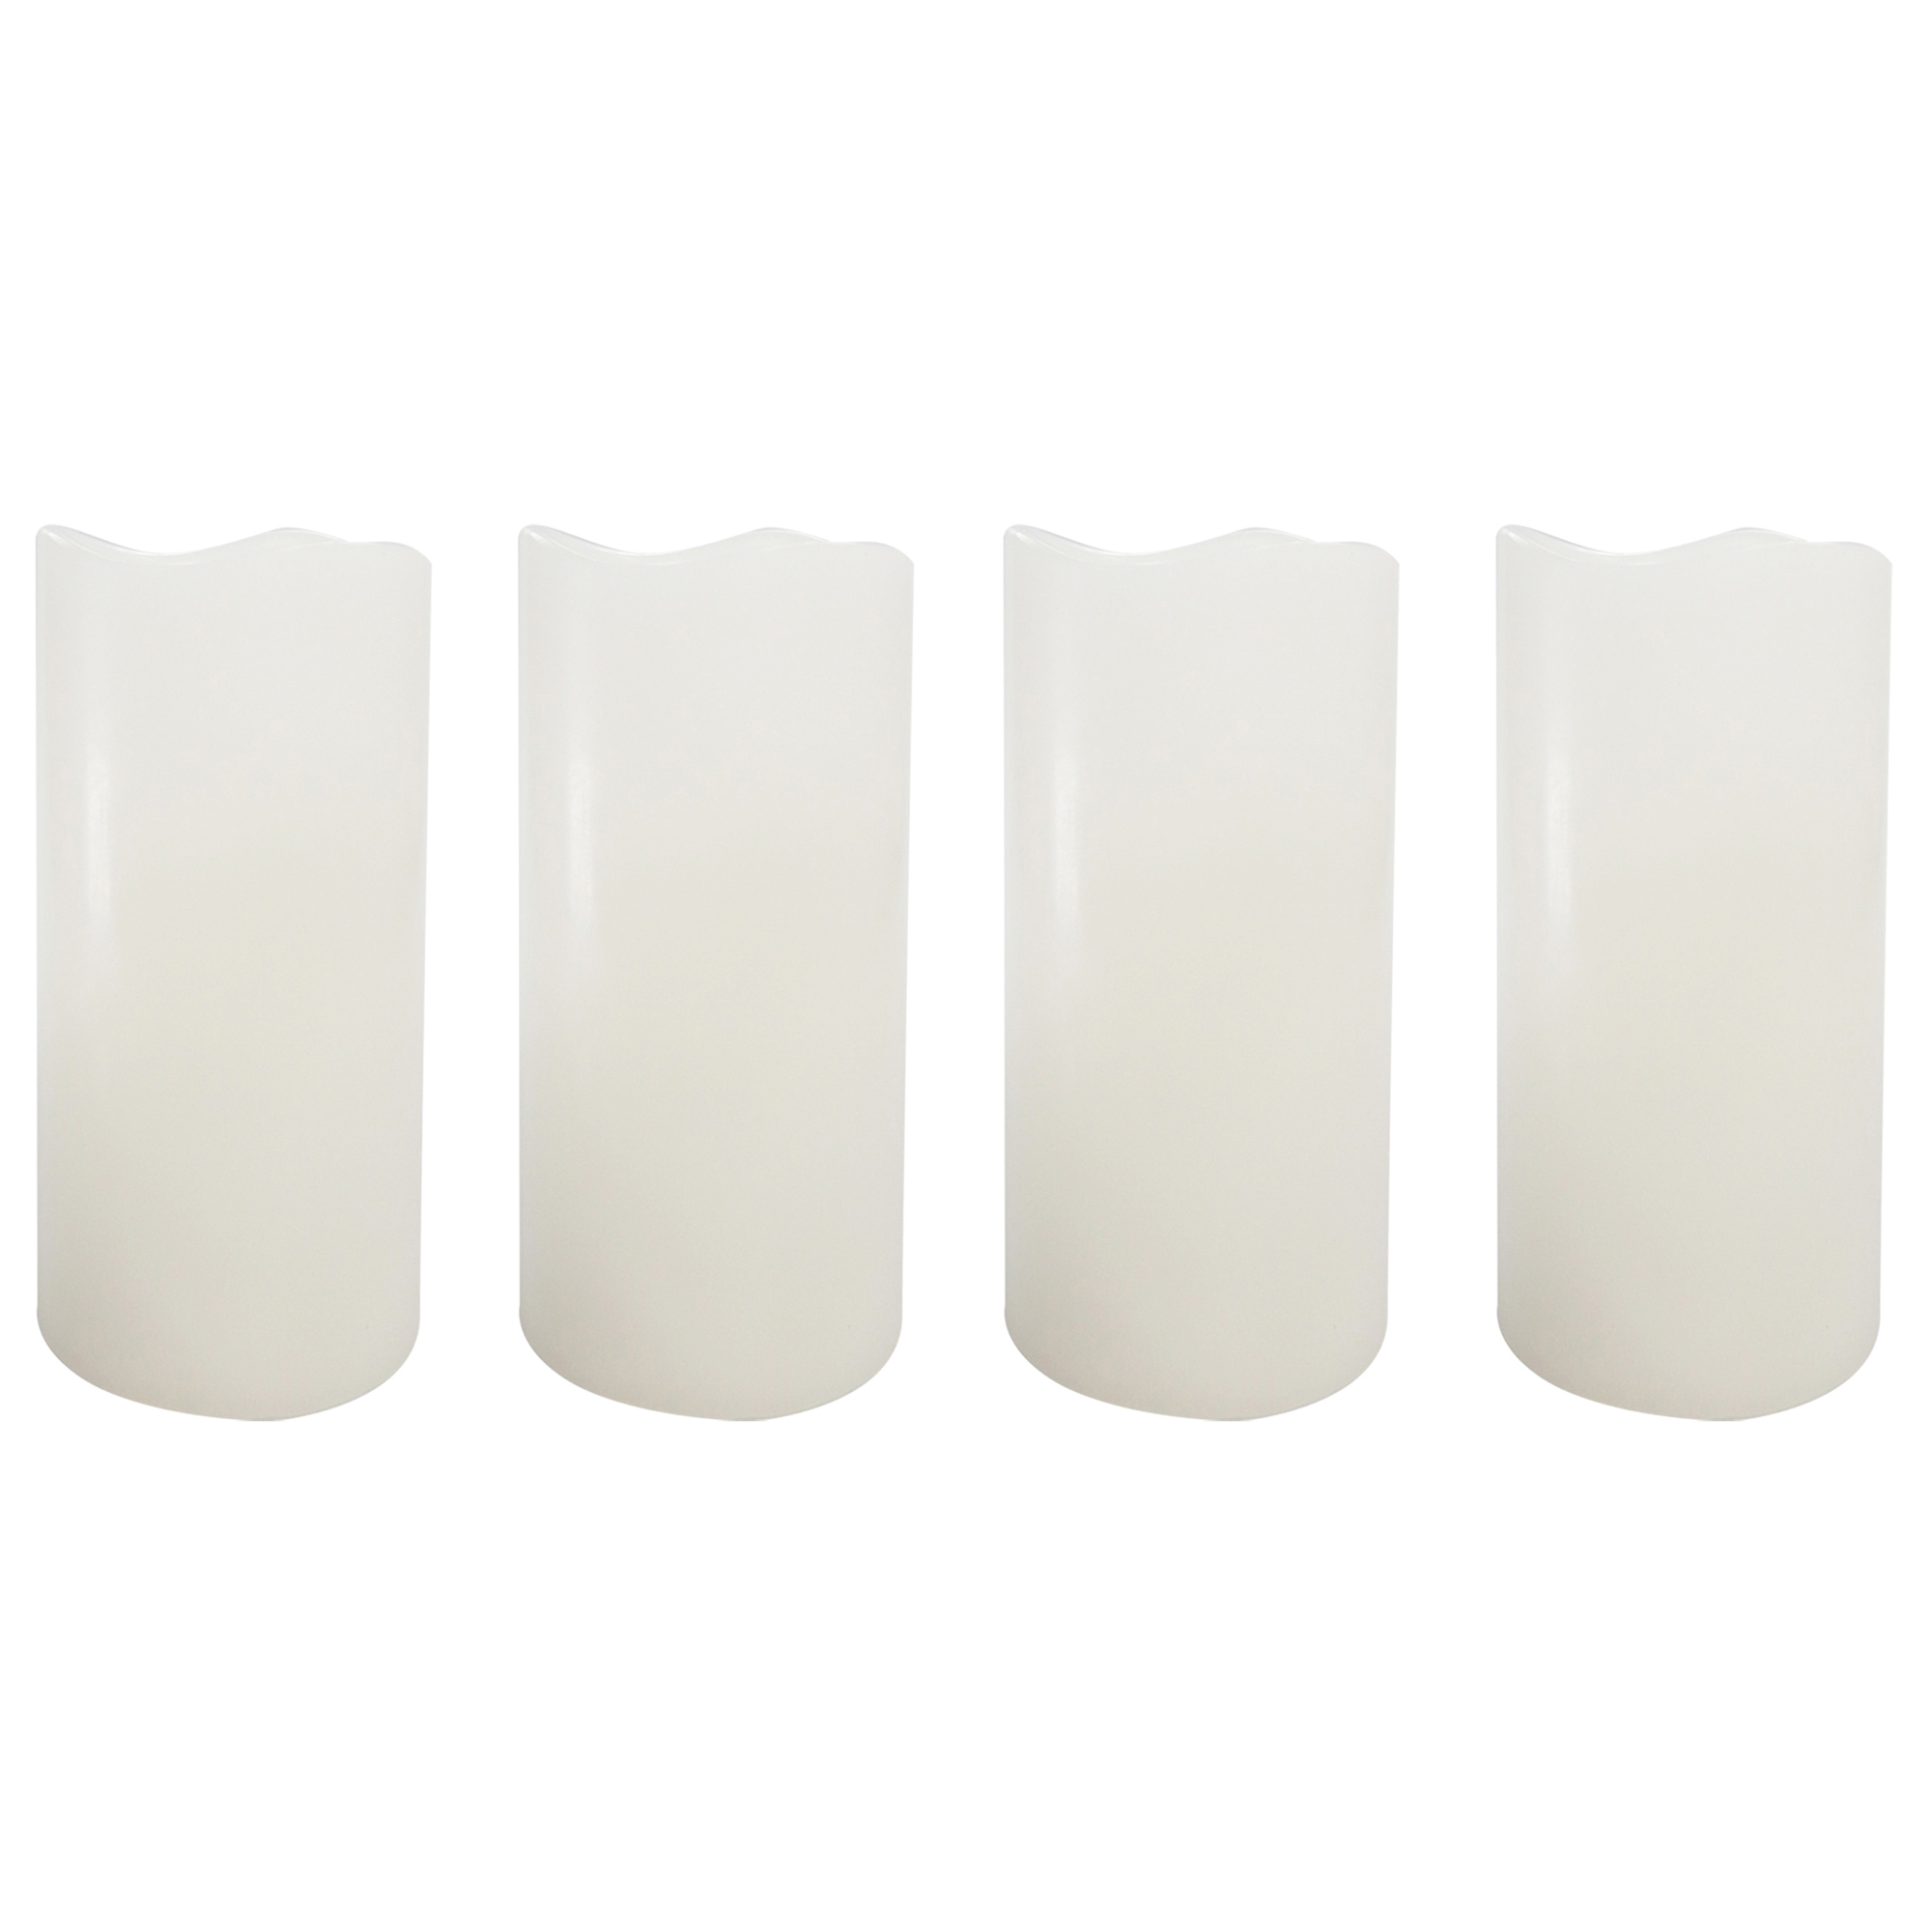 Better Homes and Gardens Flameless LED Pillar Candles 4-Pack, Vanilla Scented - image 4 of 4